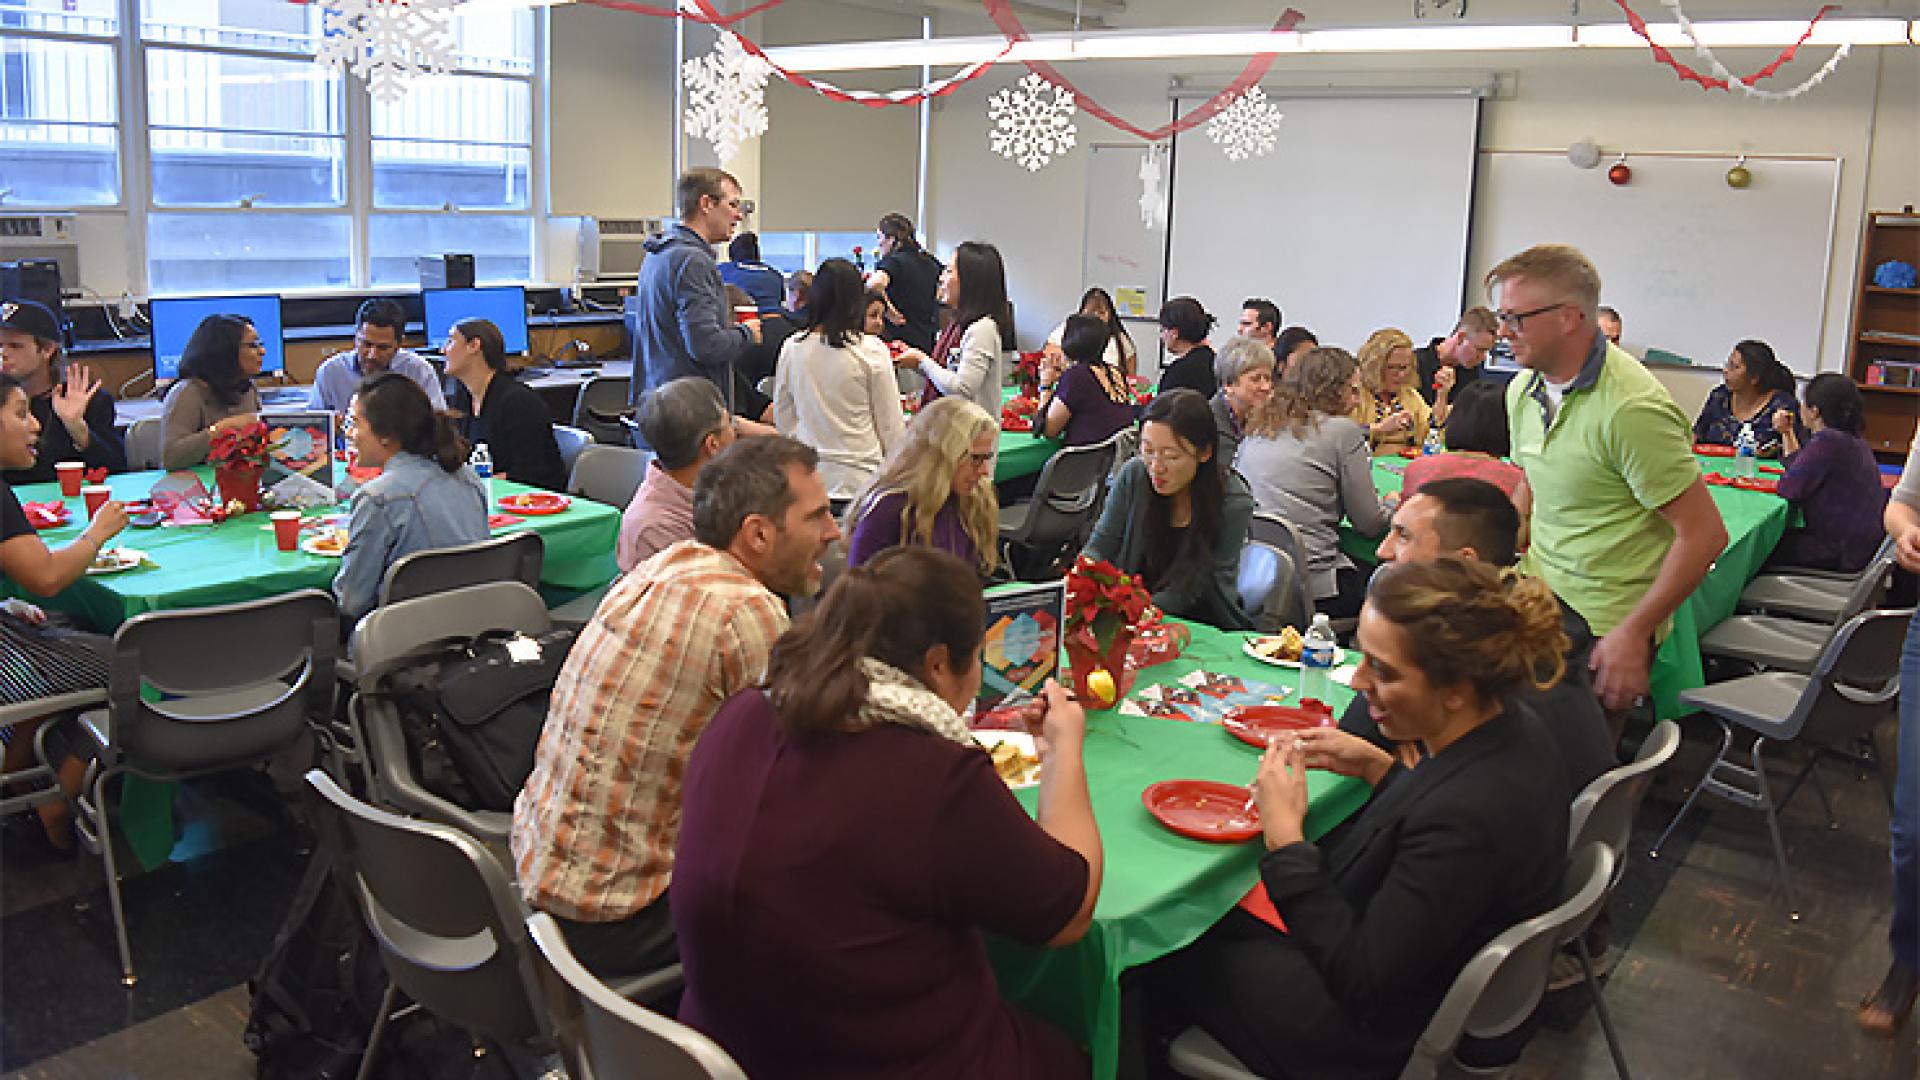 Full house at the December 2017 CSULB BUILD Holiday Faculty Mixer